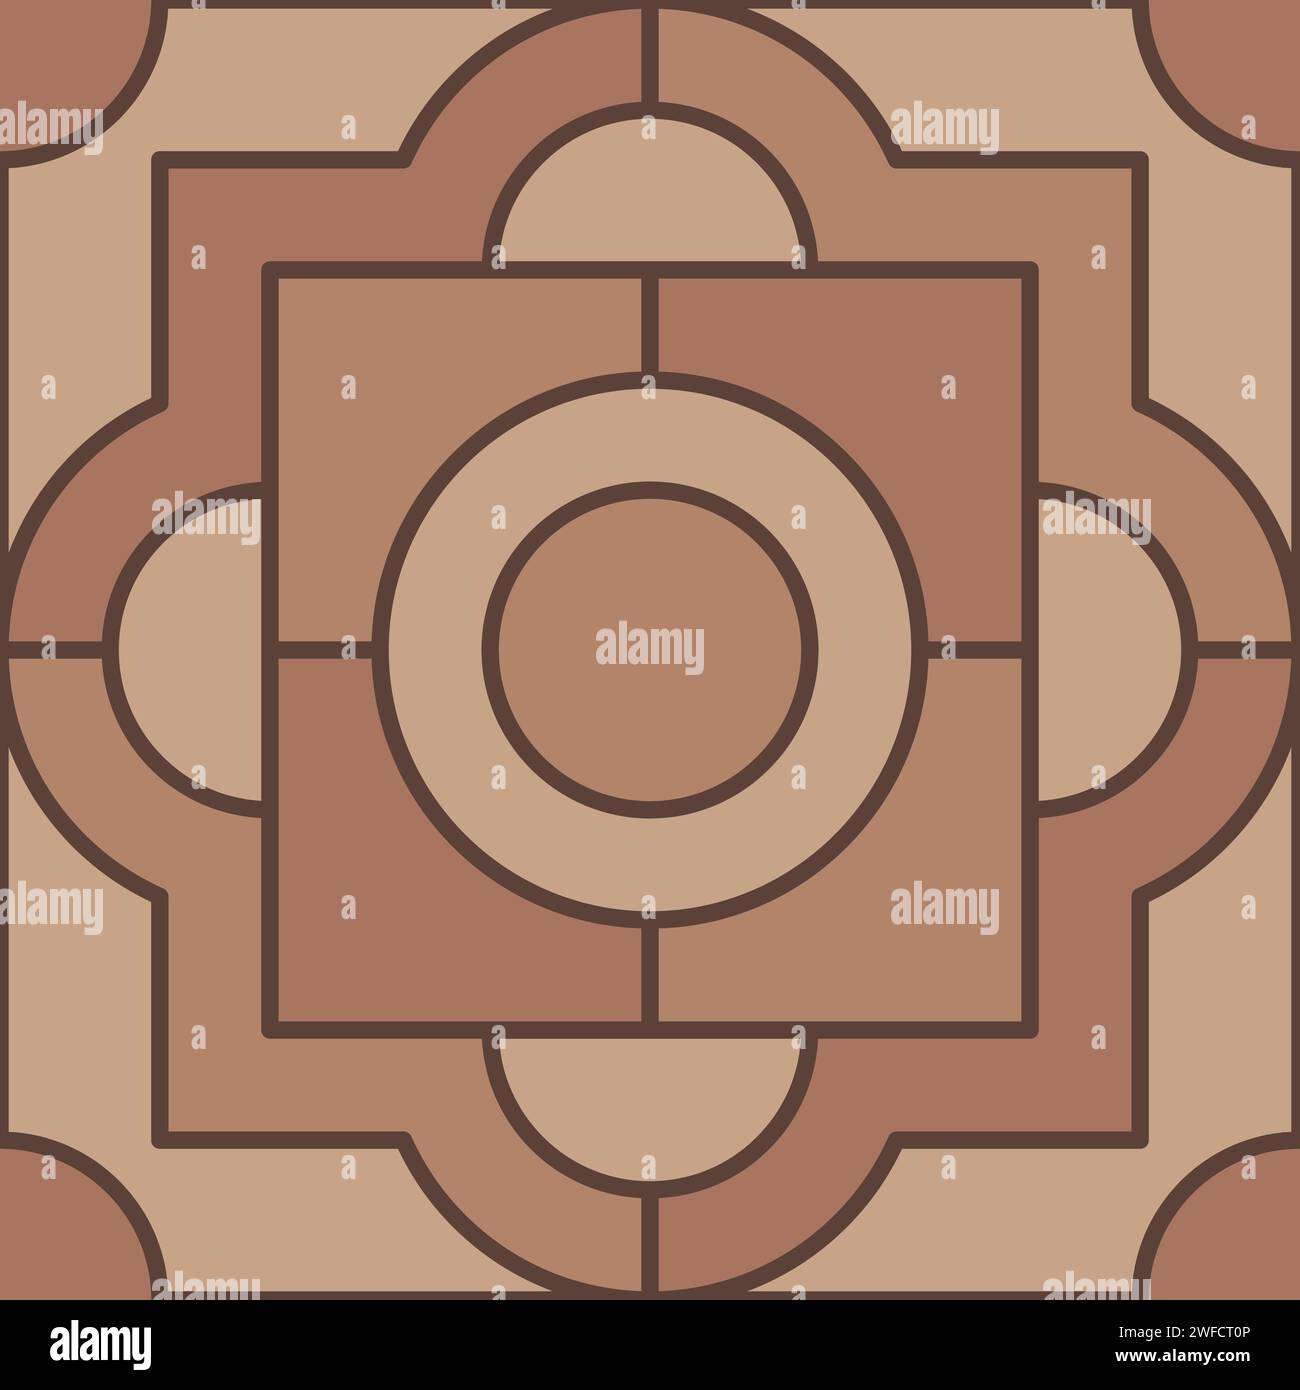 Cobblestone pavement plan, street or walkway paving. Vector floor tile or laminate wood flooring with contrasting blocks and bricks inlay, top view Stock Vector